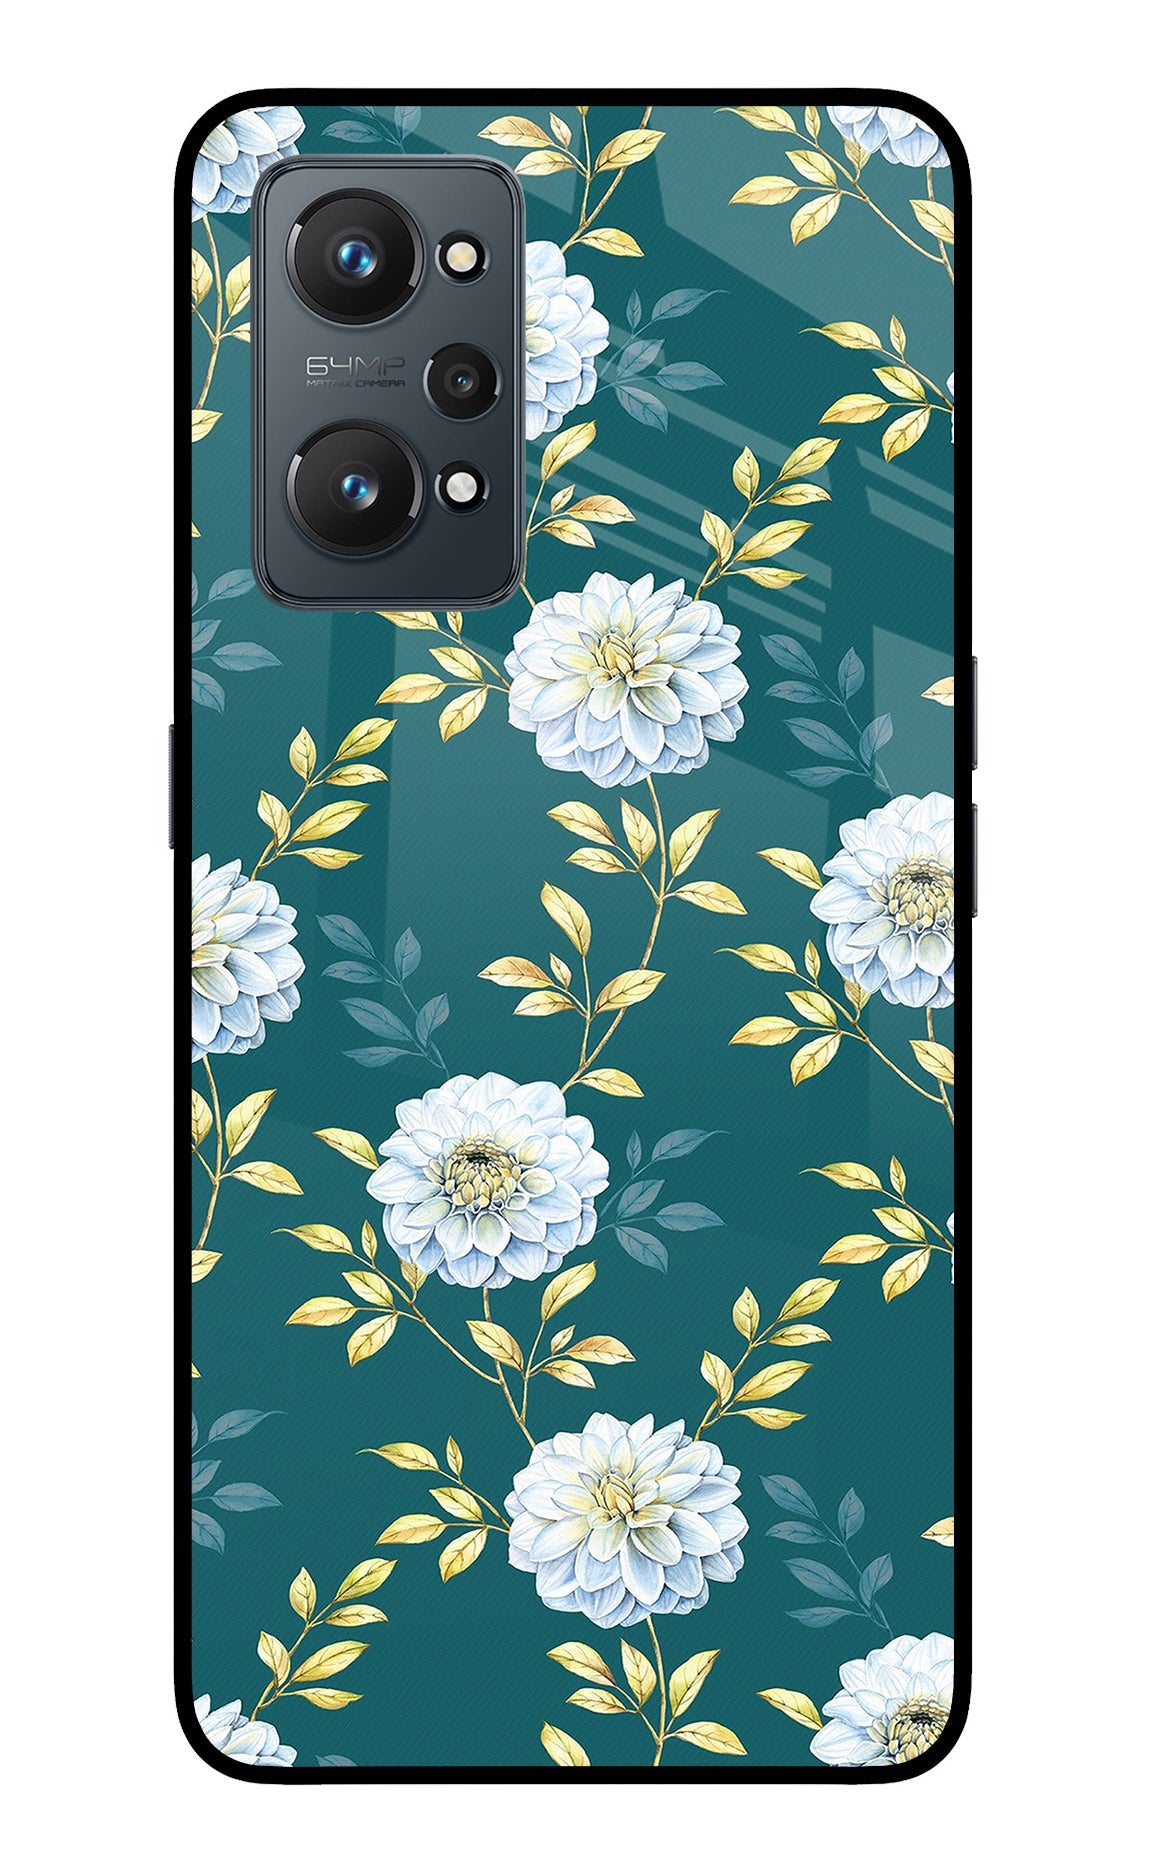 Flowers Realme GT NEO 2/Neo 3T Glass Case